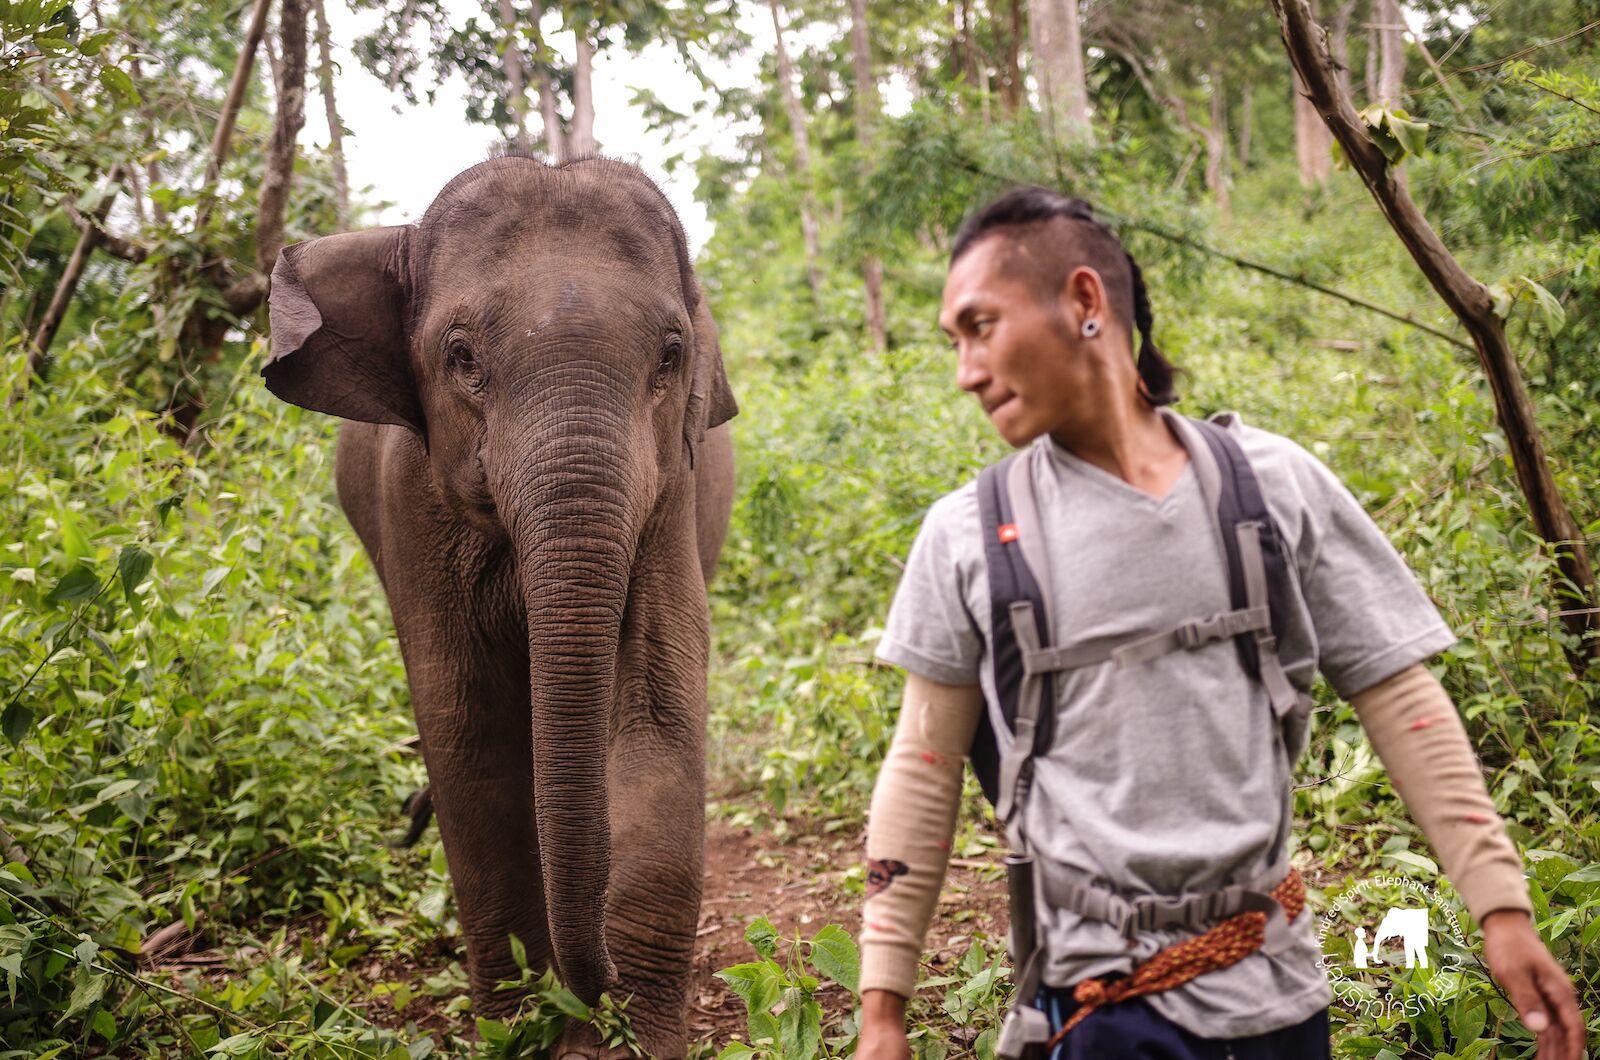 Guy walking with elephant in Thailand jungle